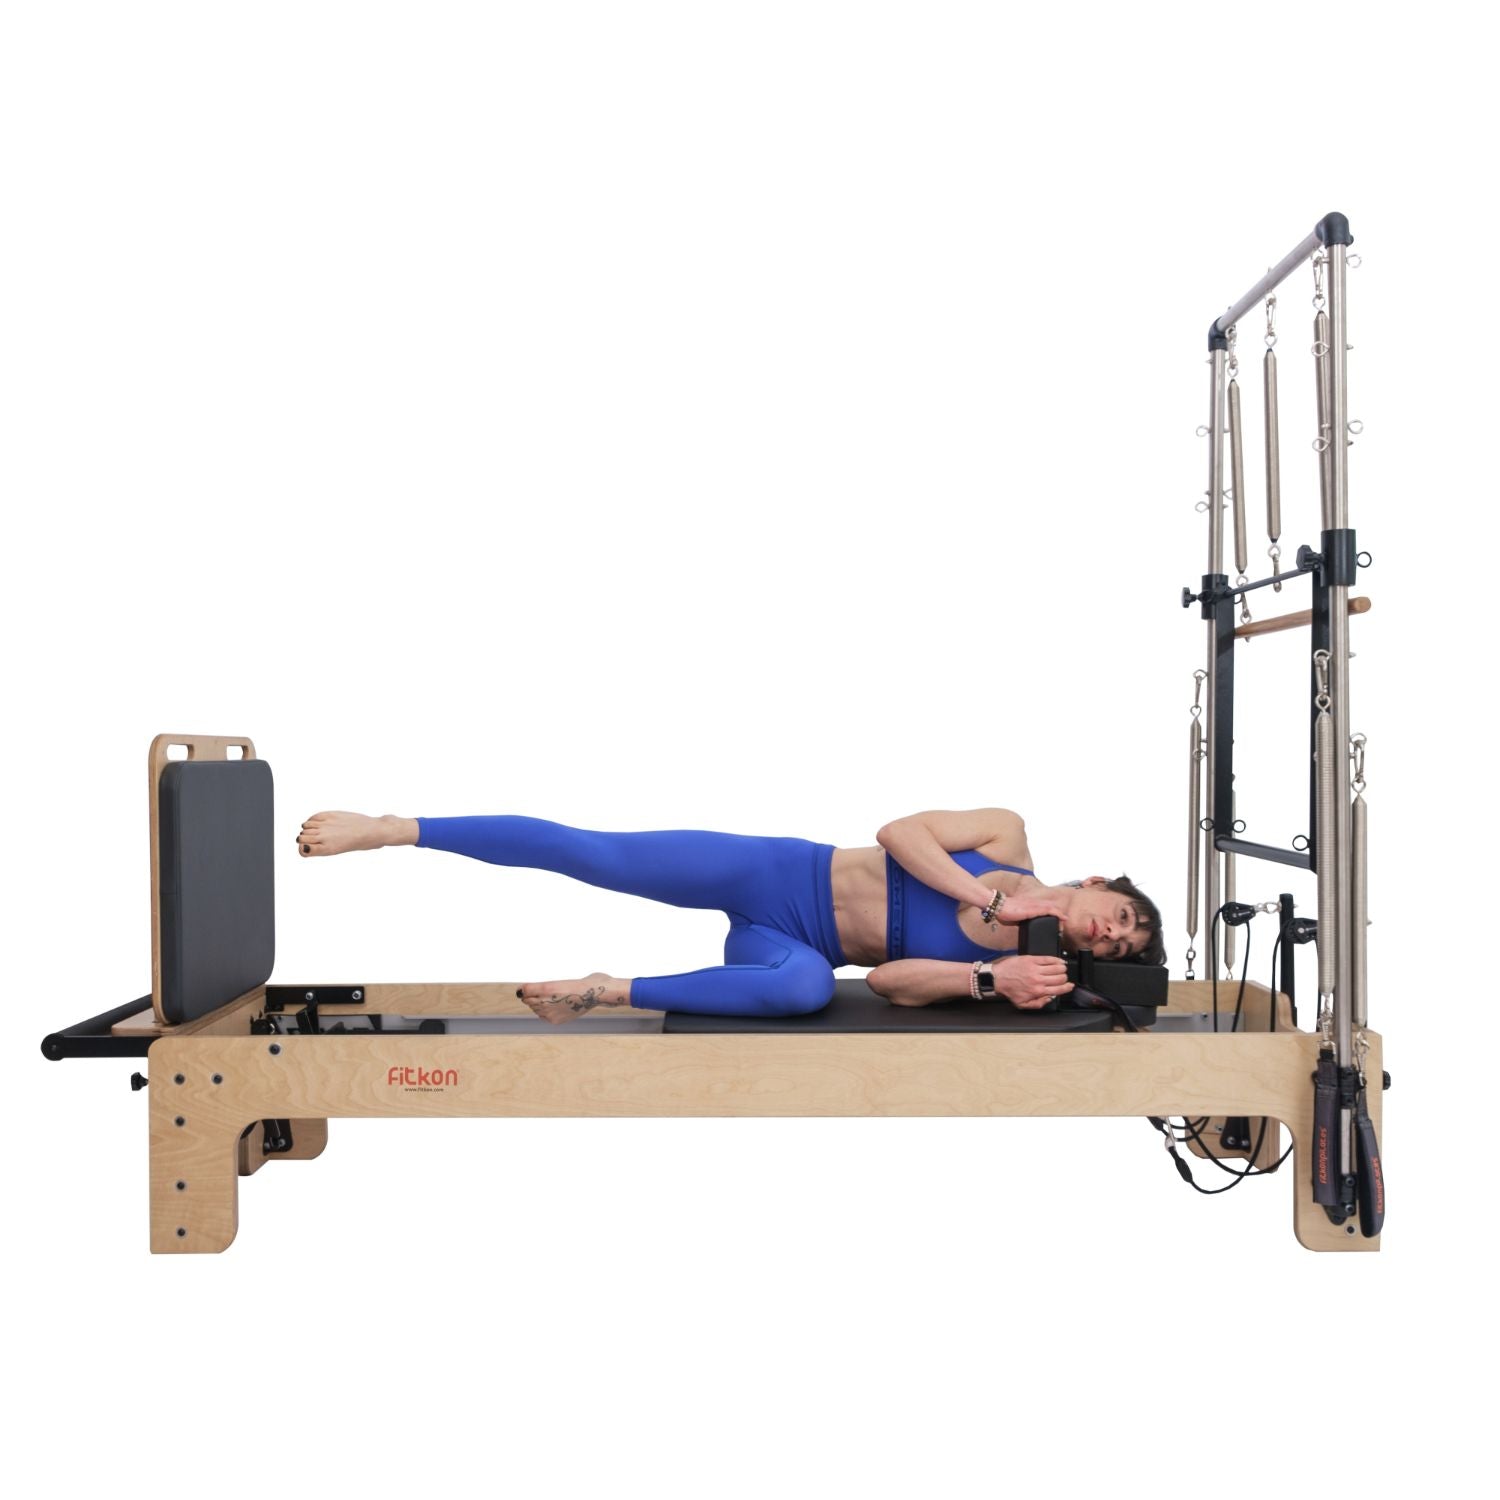 Buy Fitkon Powerhouse Plus Pilates Reformer with Free Shipping